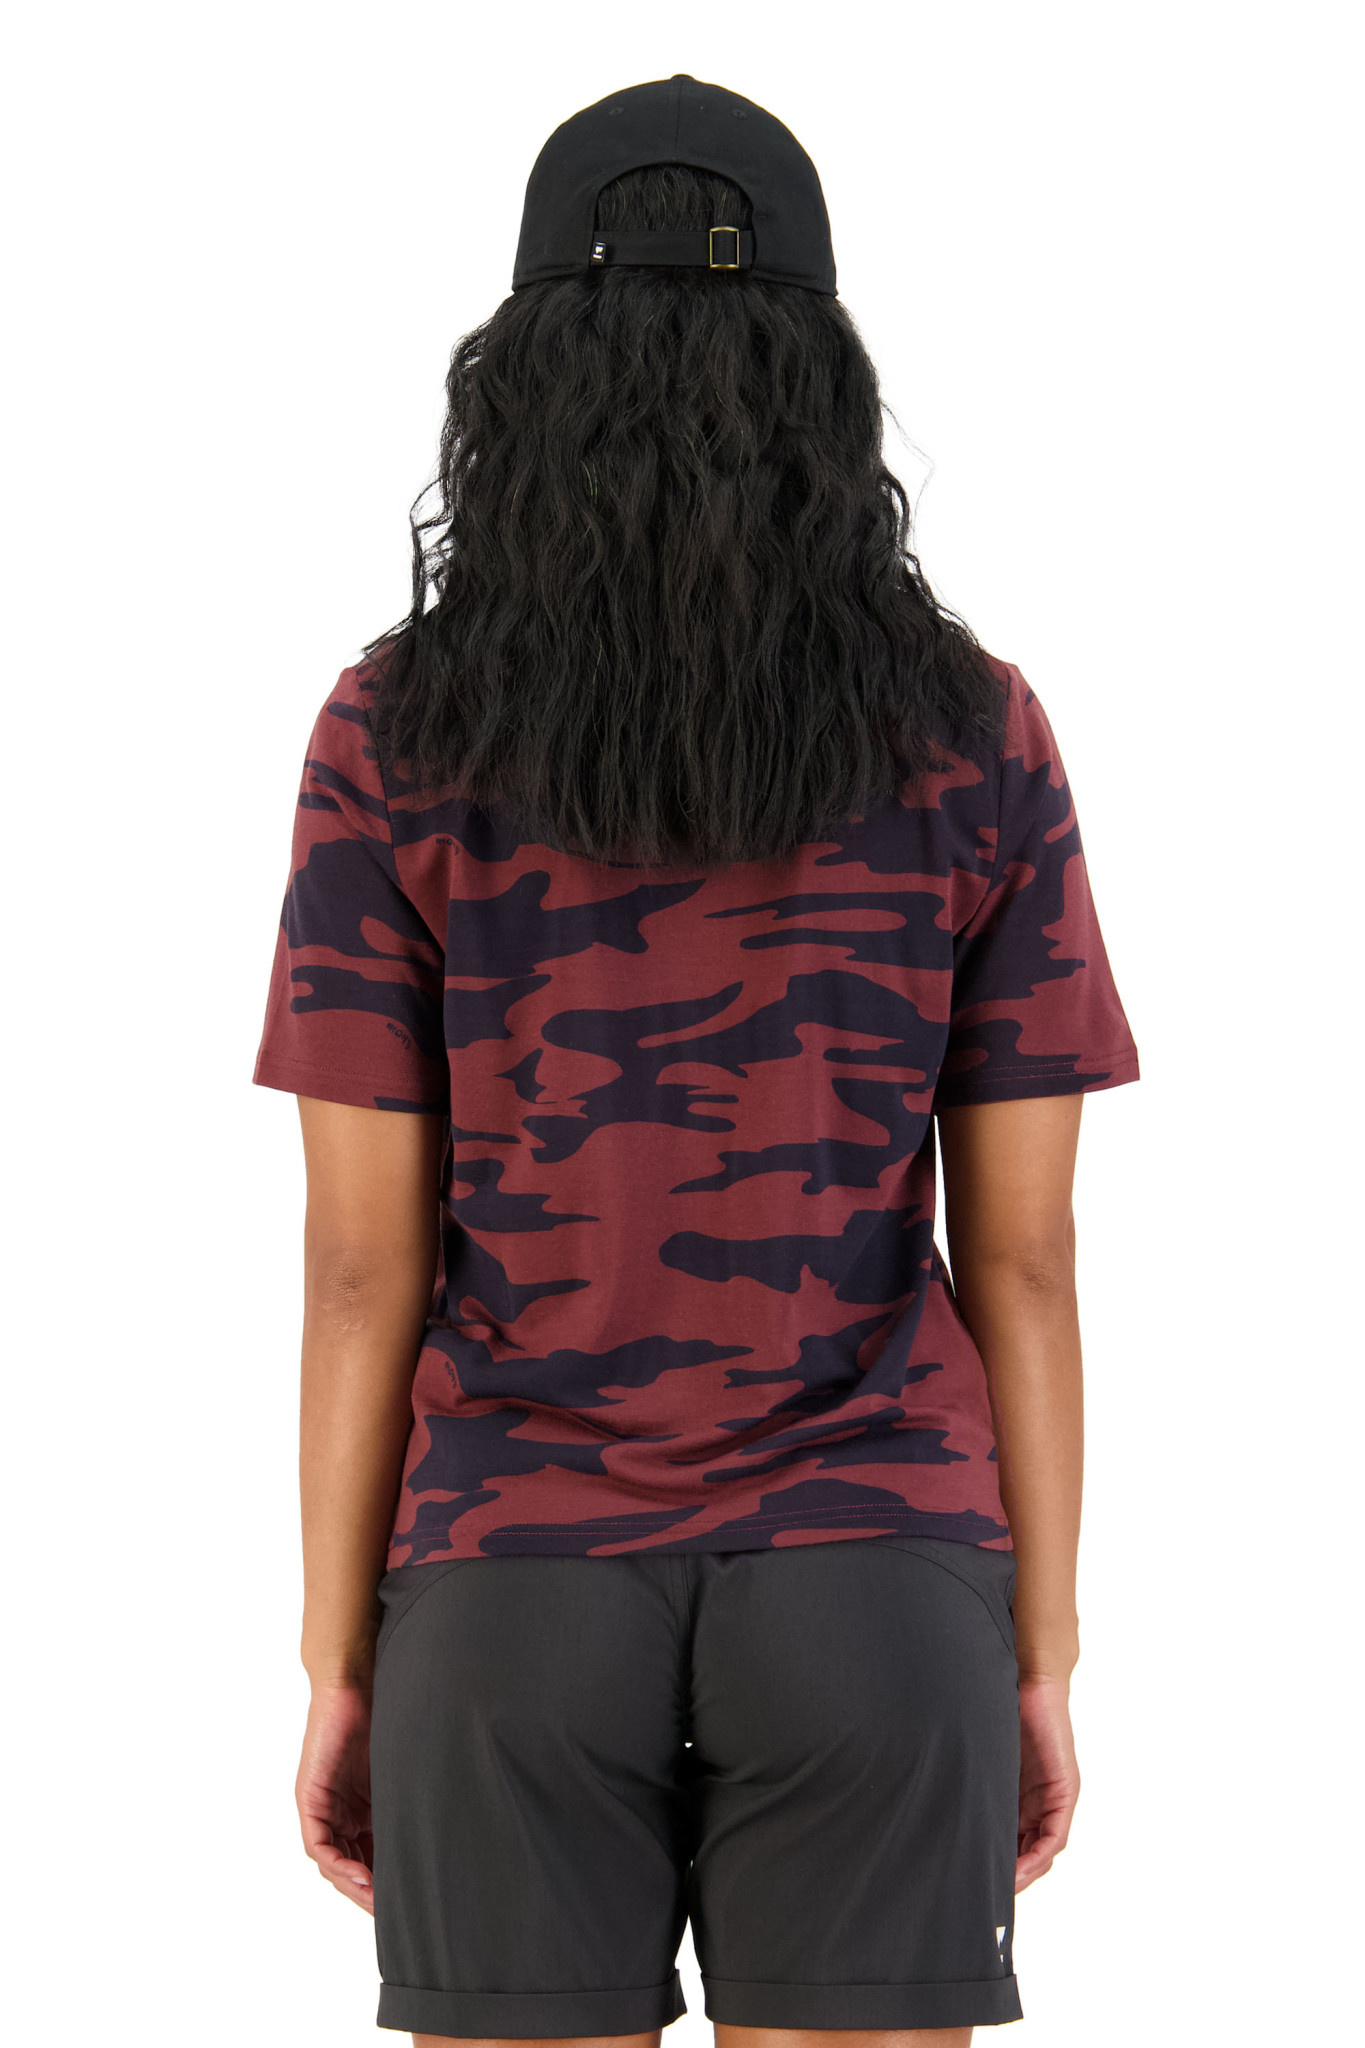 MONS ROYALE Mons Royale Women's Icon Relaxed Tee